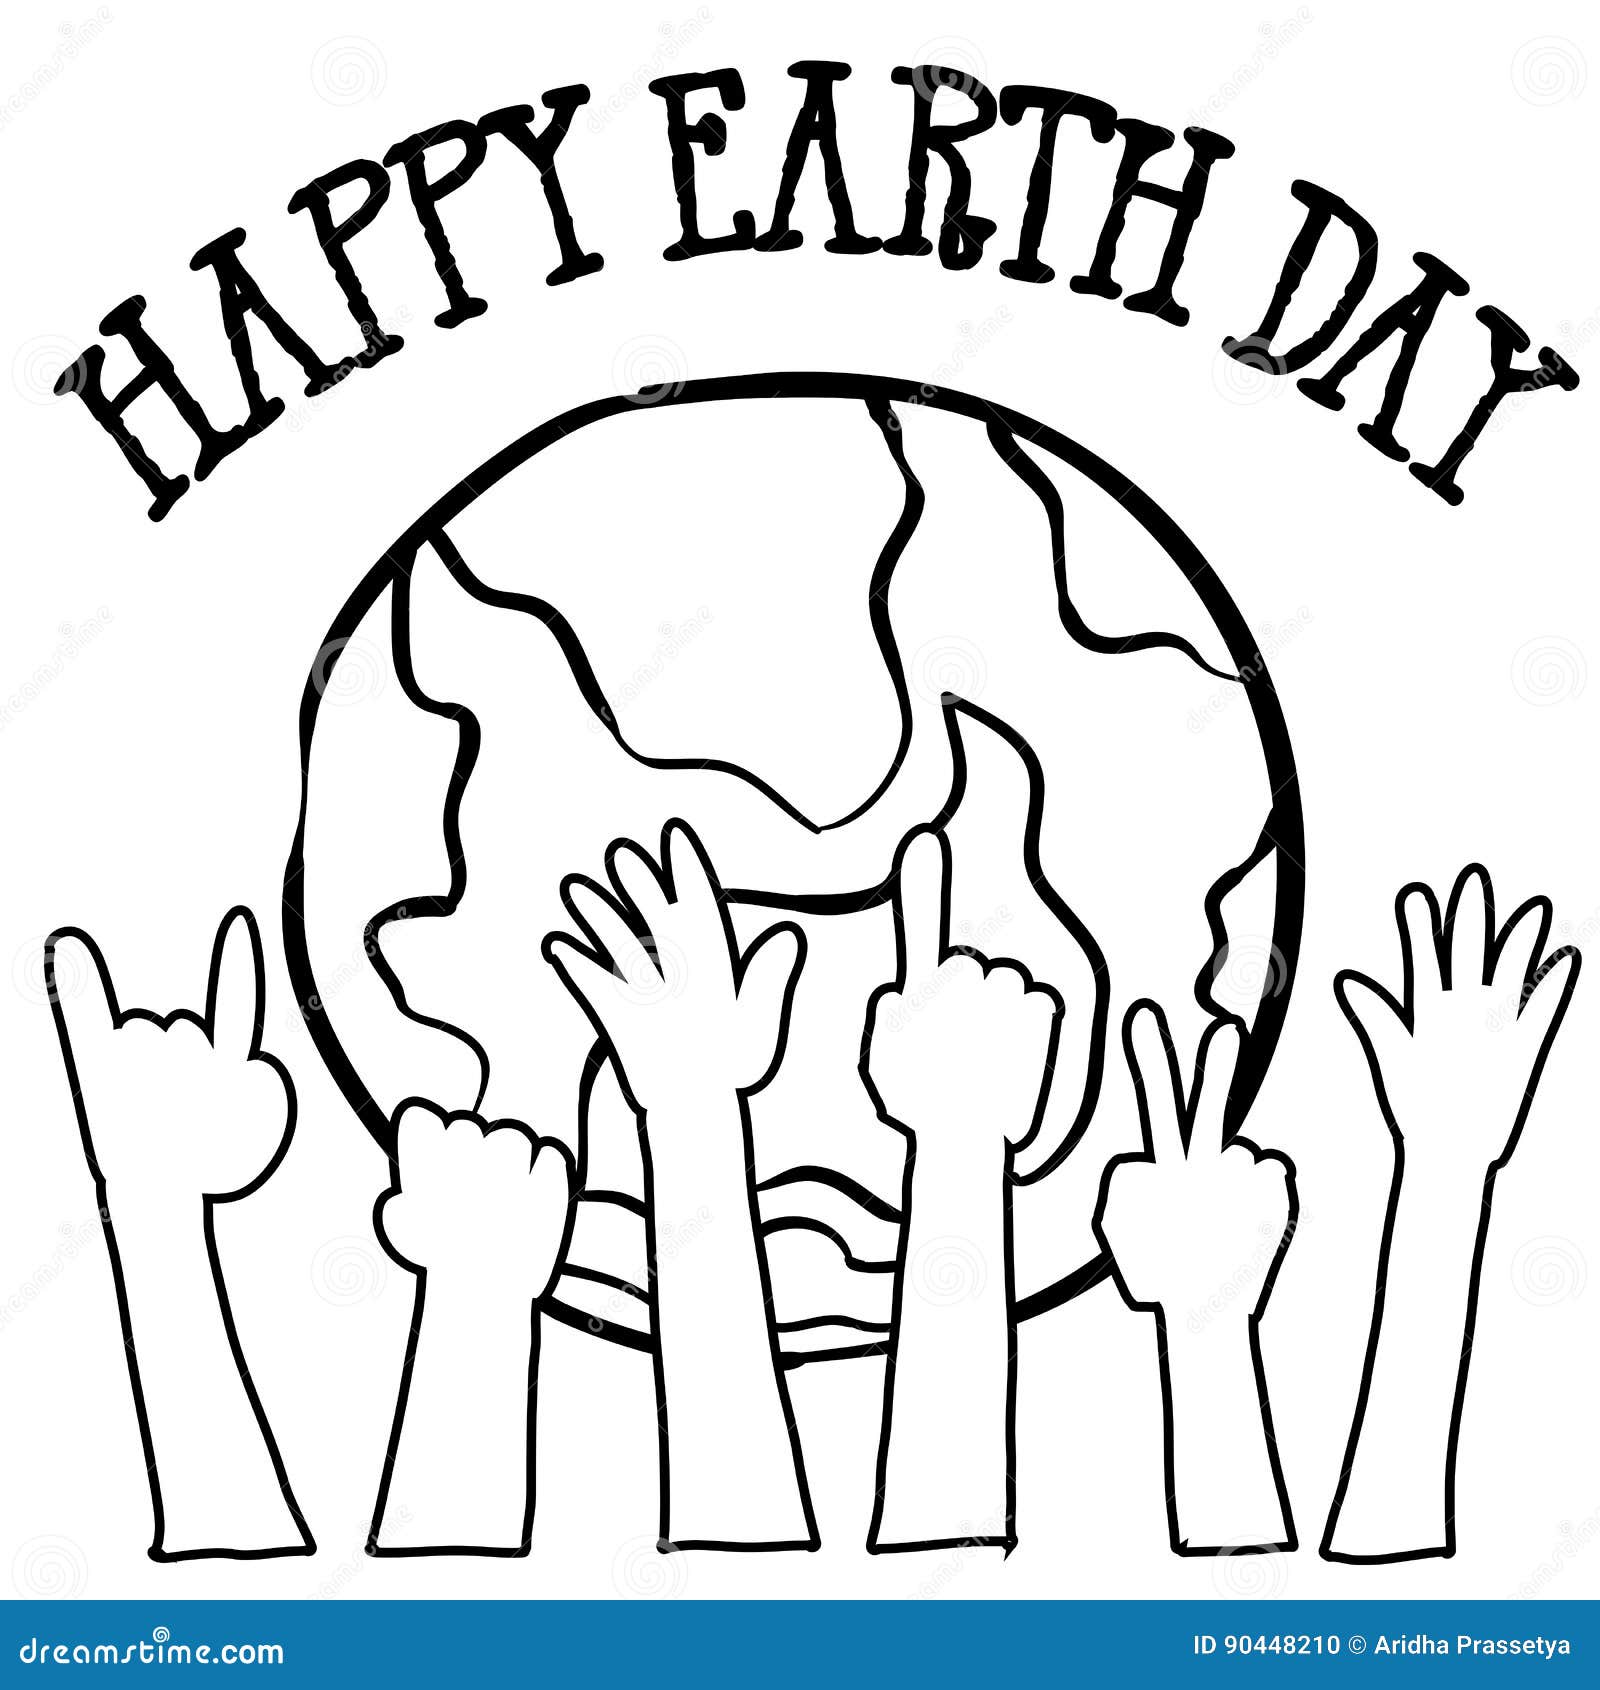 Earth Day Art Lessons, Our Planet Earth Art Project Activity Bundle